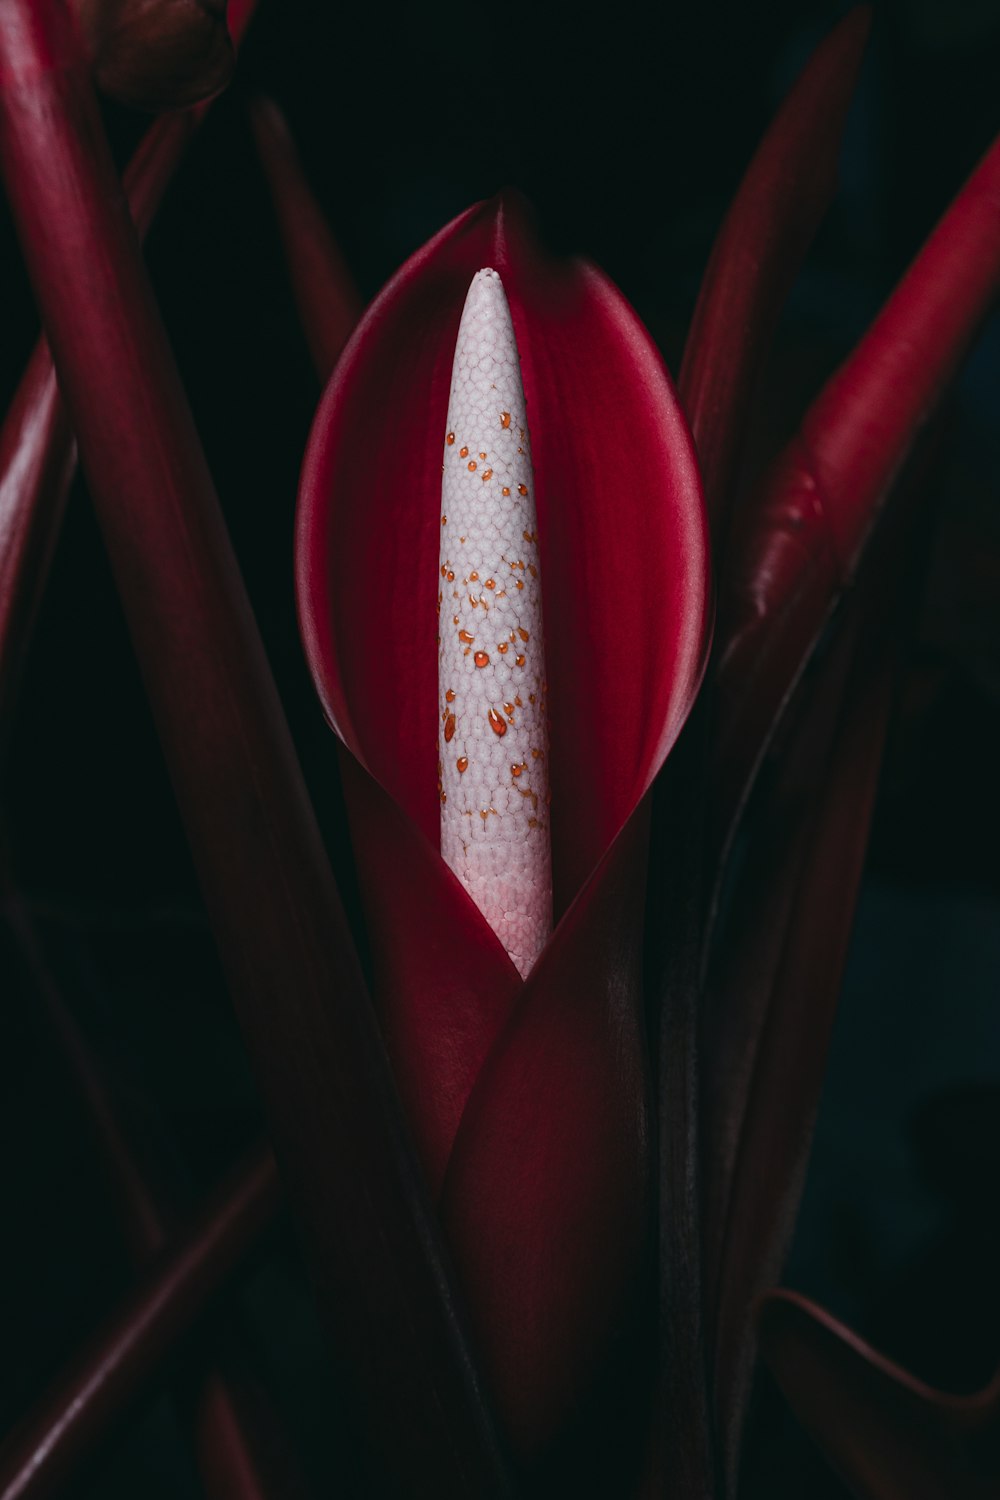 red and white plant in close up photography